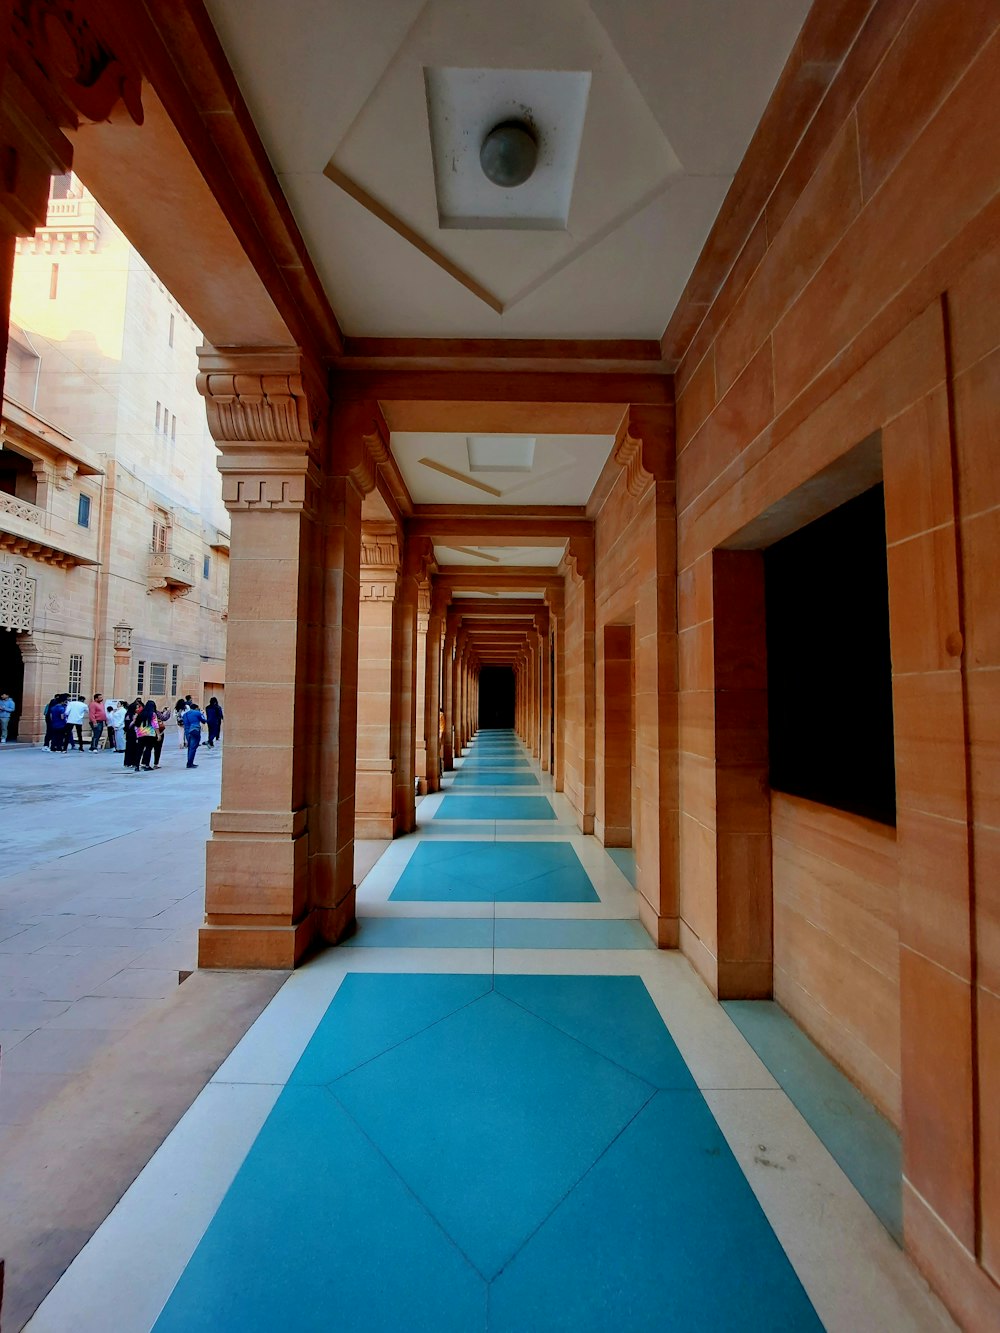 a long hallway with blue and white flooring